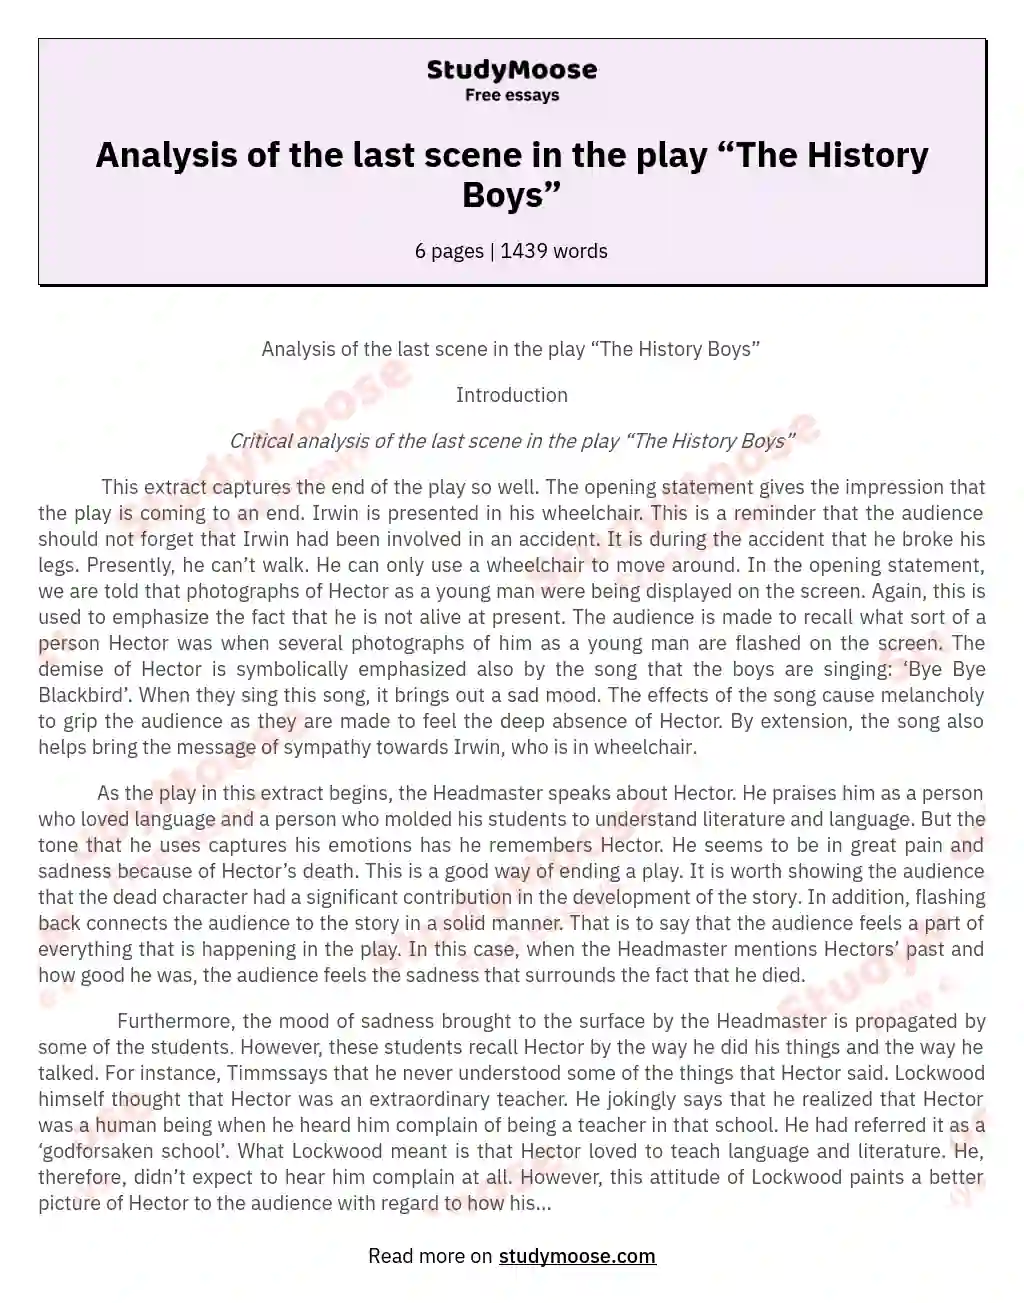 Analysis of the last scene in the play “The History Boys” essay